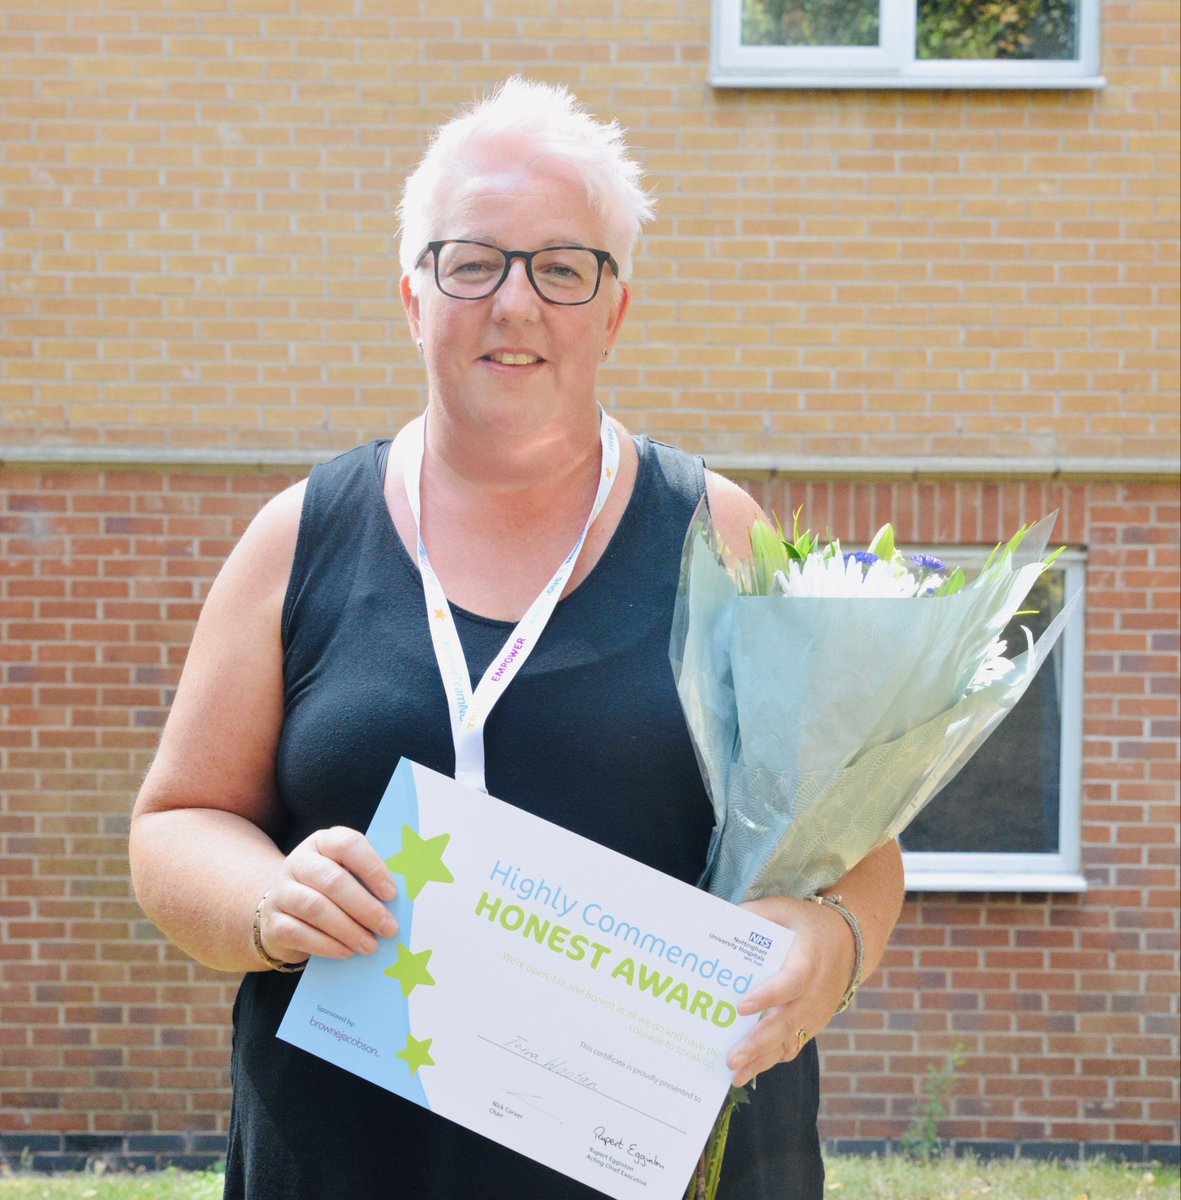 ⭐️Congratulations to Trina Wootton, Office and Business Manager for @nuhinstitute, who’s been Highly Commended in the Honest category of the #TeamNUHAwards.⭐️ She was nominated by colleague Alana Singh who praised Trina for supporting others, and being open and honest.